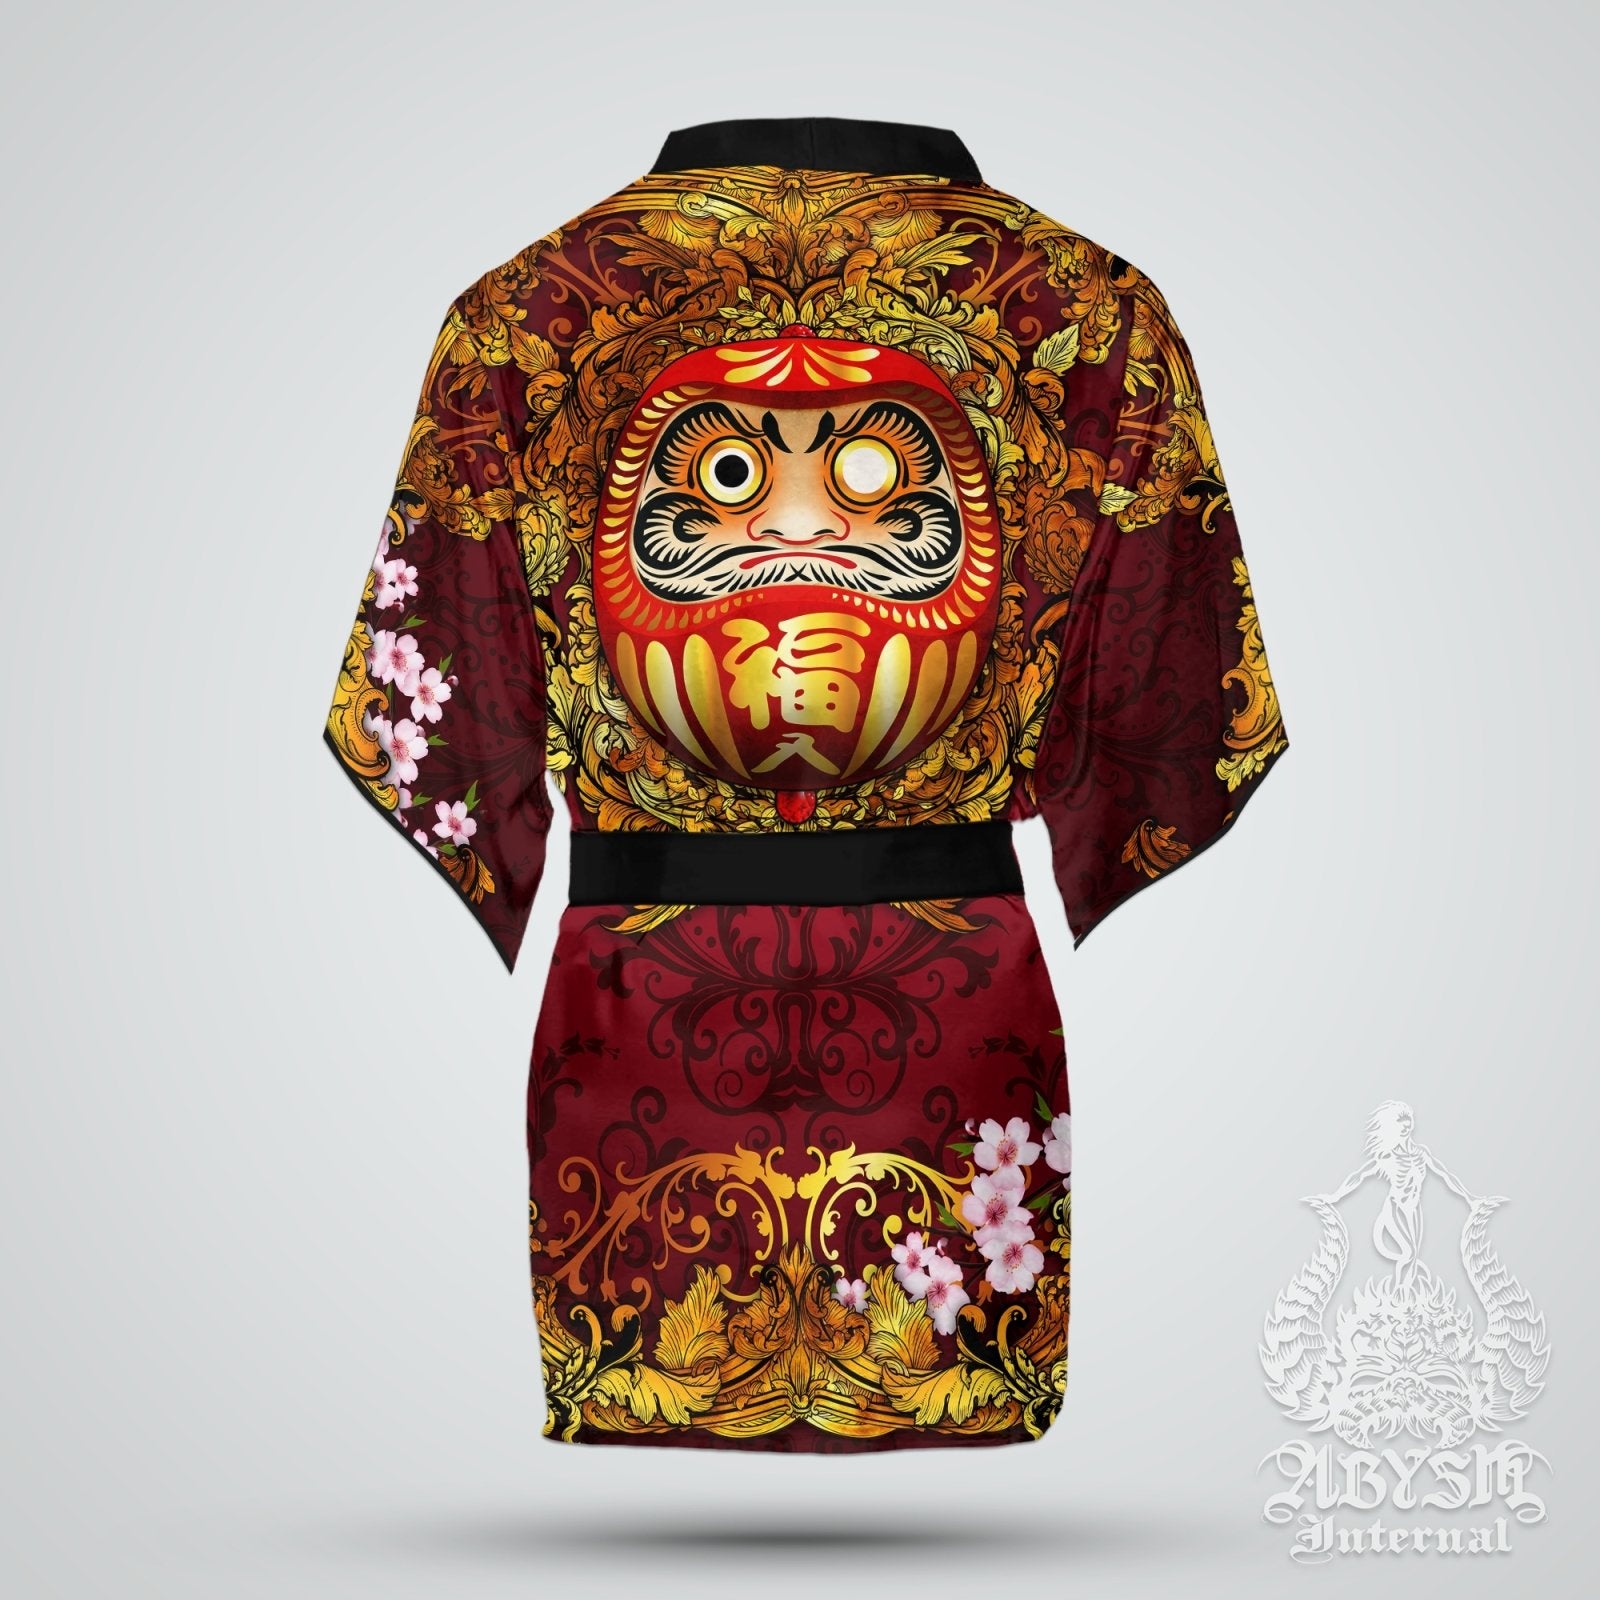 Daruma Cover Up, Beach Outfit, Party Kimono, Japanese Summer Festival Robe, Indie and Alternative Clothing, Unisex - Red - Abysm Internal